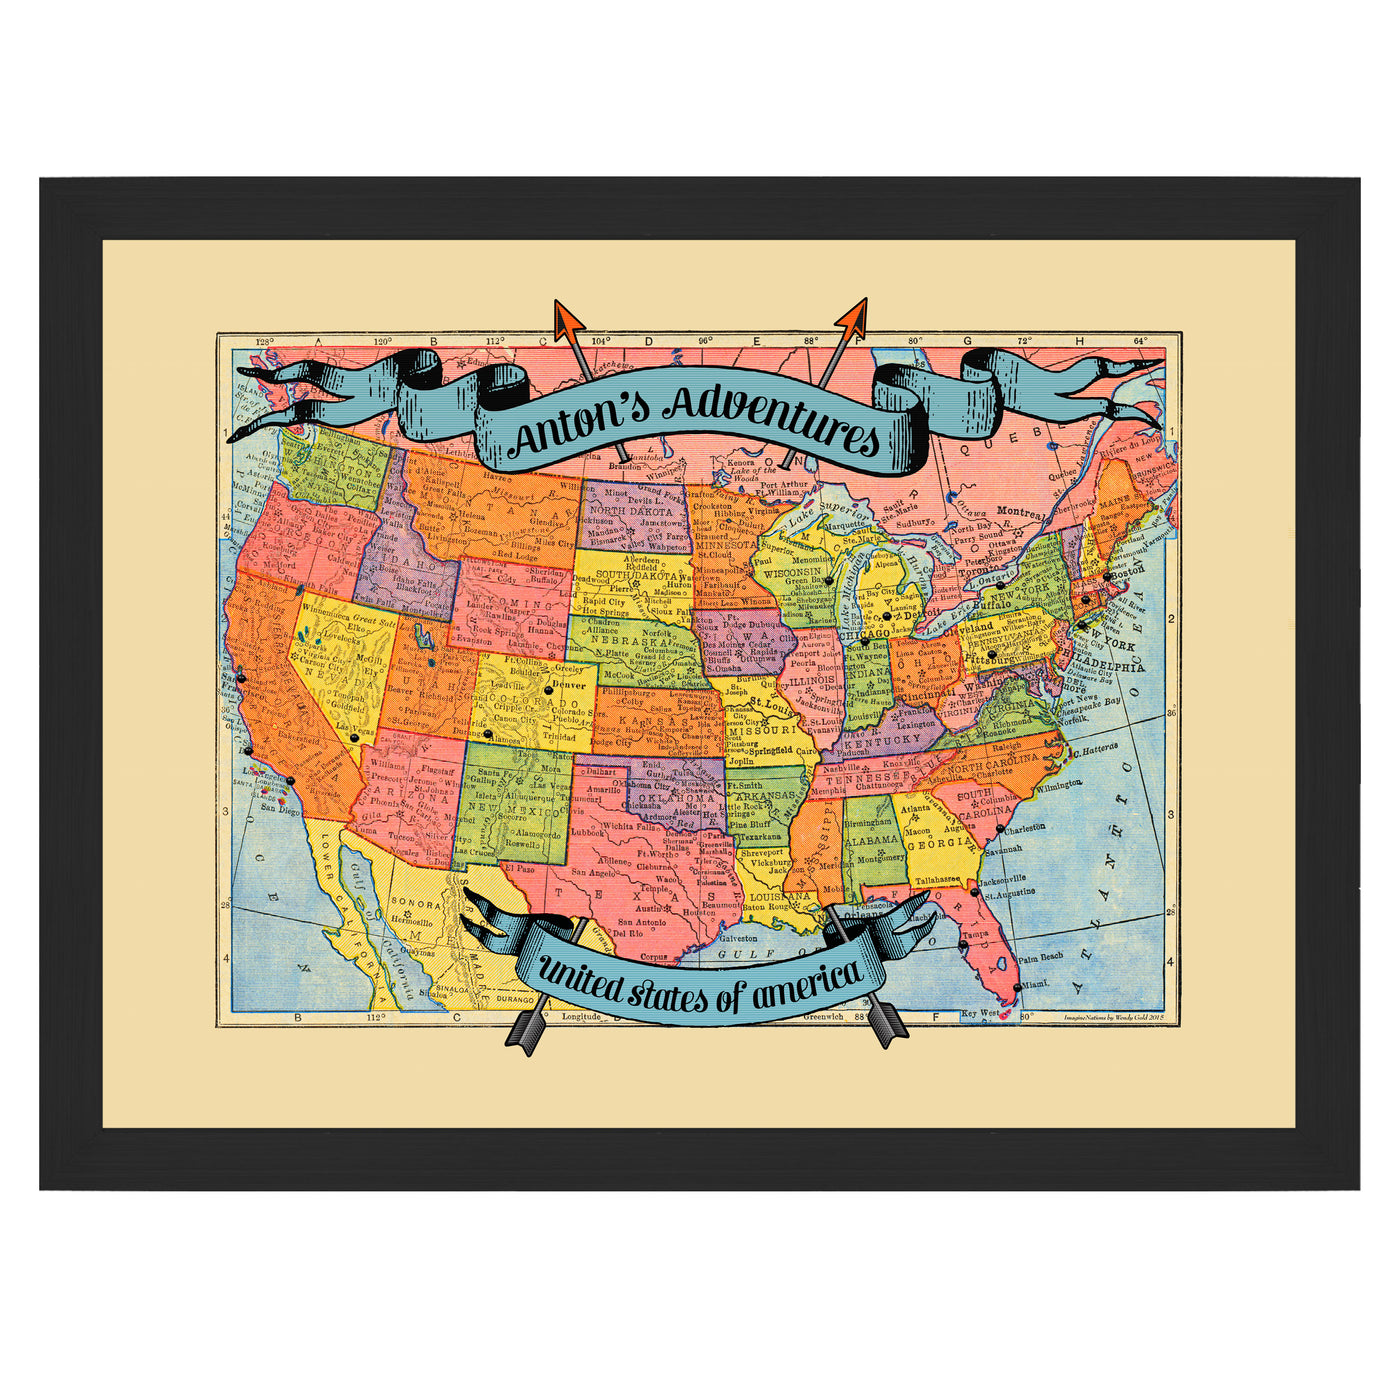 USA Adventures Travel Map with Pins framed